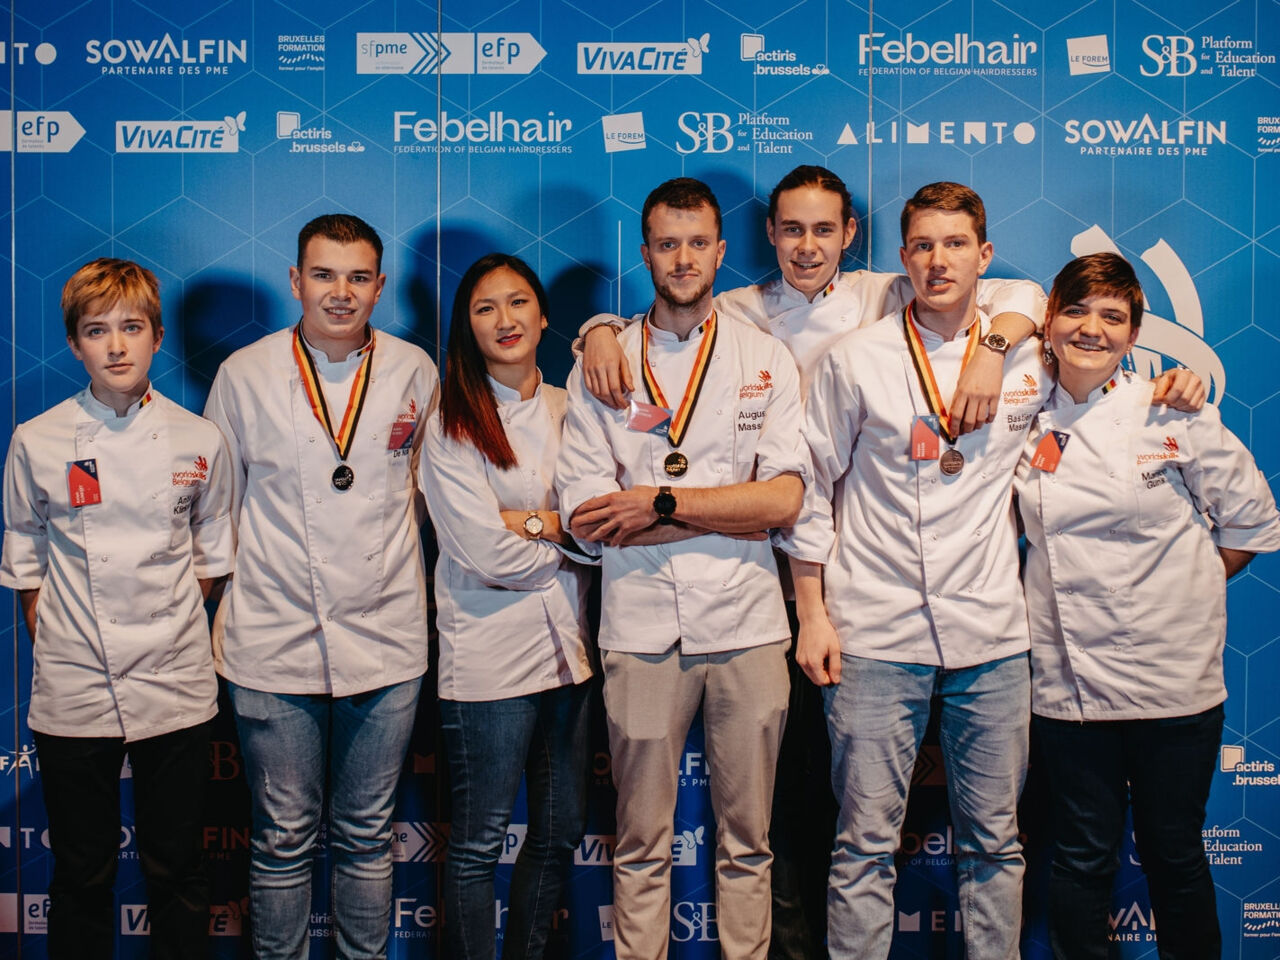 Seven Competitors from the WorldSkills Belgium team pose with medals.